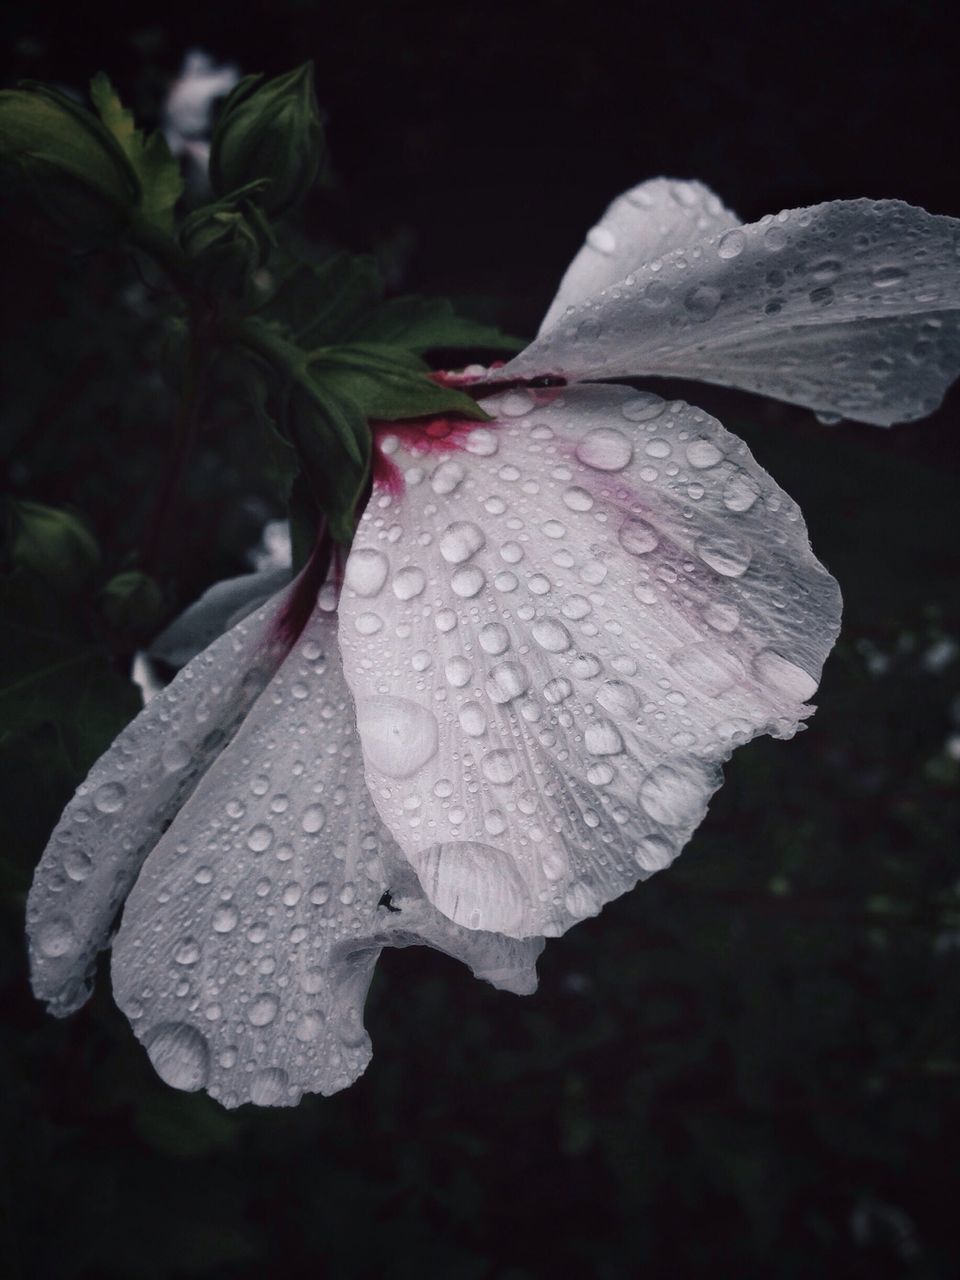 drop, wet, water, freshness, leaf, close-up, fragility, growth, dew, beauty in nature, raindrop, nature, season, weather, rain, plant, flower, focus on foreground, droplet, leaf vein